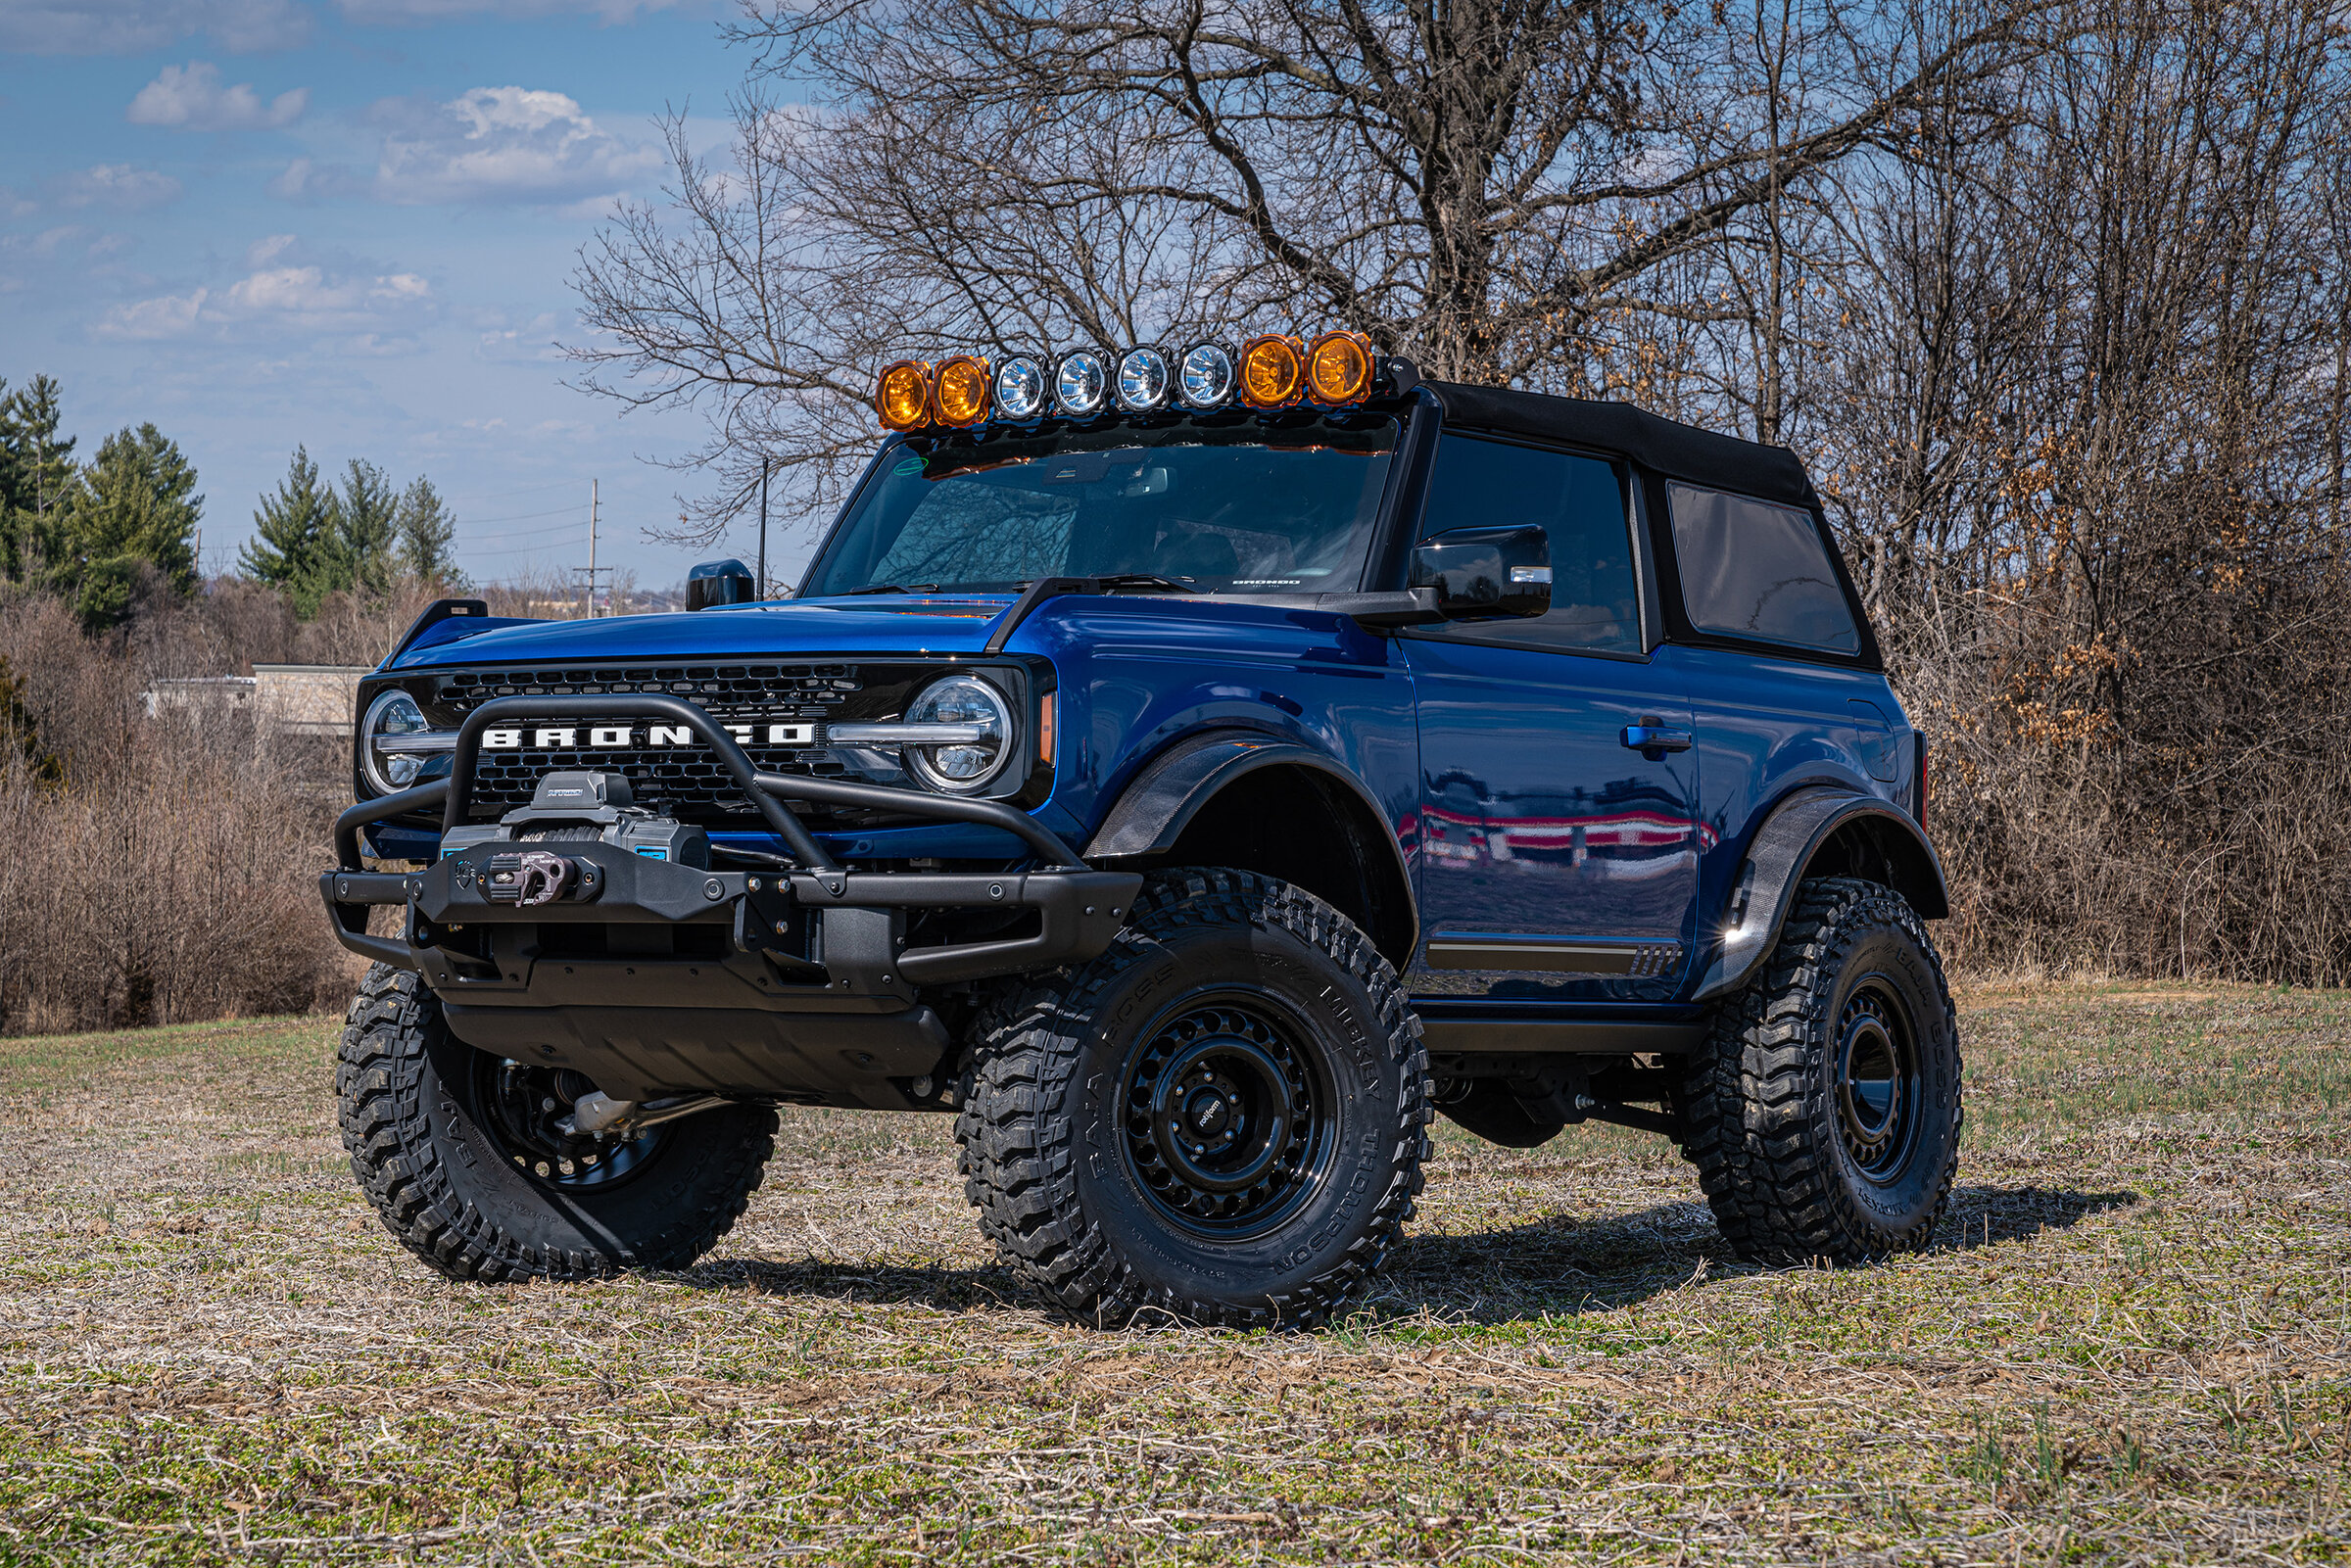 Ford Bronco Lbracket 2 door FE build (UPDATED) on Zone 3" lift and 37's 9E1DC90C-FDF6-4E2F-8D55-DEFE63AFB889